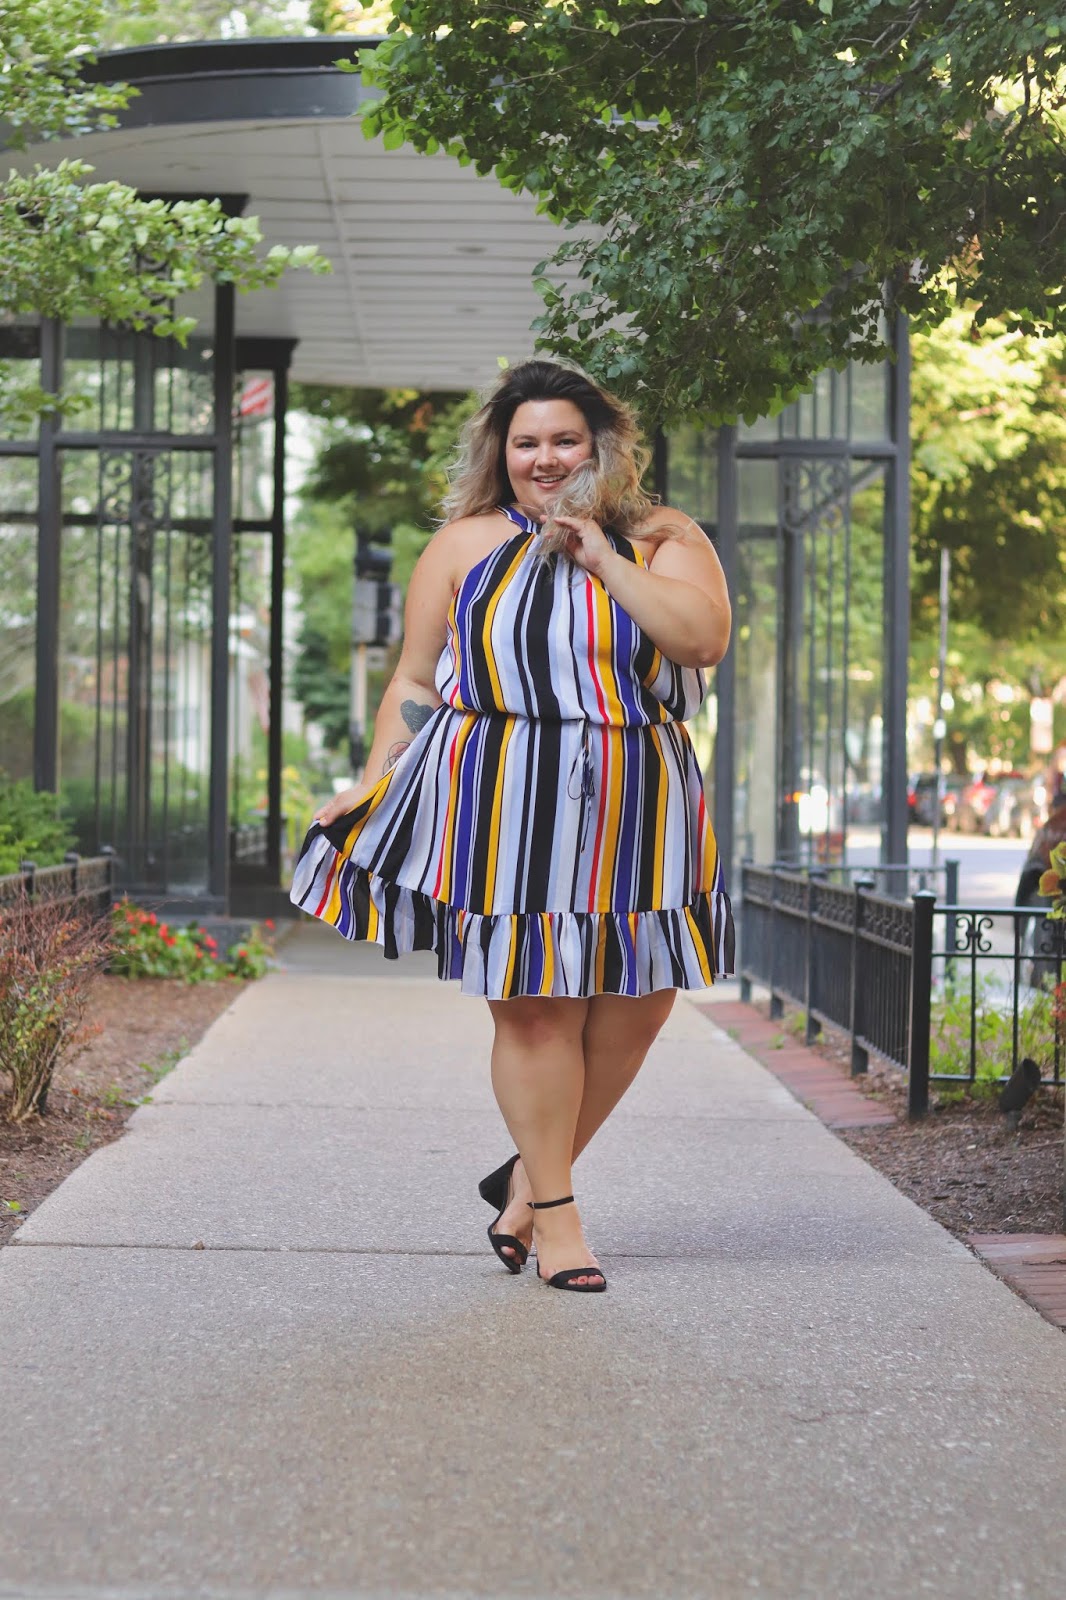 Chicago Plus Size Petite Fashion Blogger, influencer, YouTuber, and model Natalie Craig, of Natalie in the City, reviews Fashion to Figure's Christel Striped Ruffle Flounce Dress.